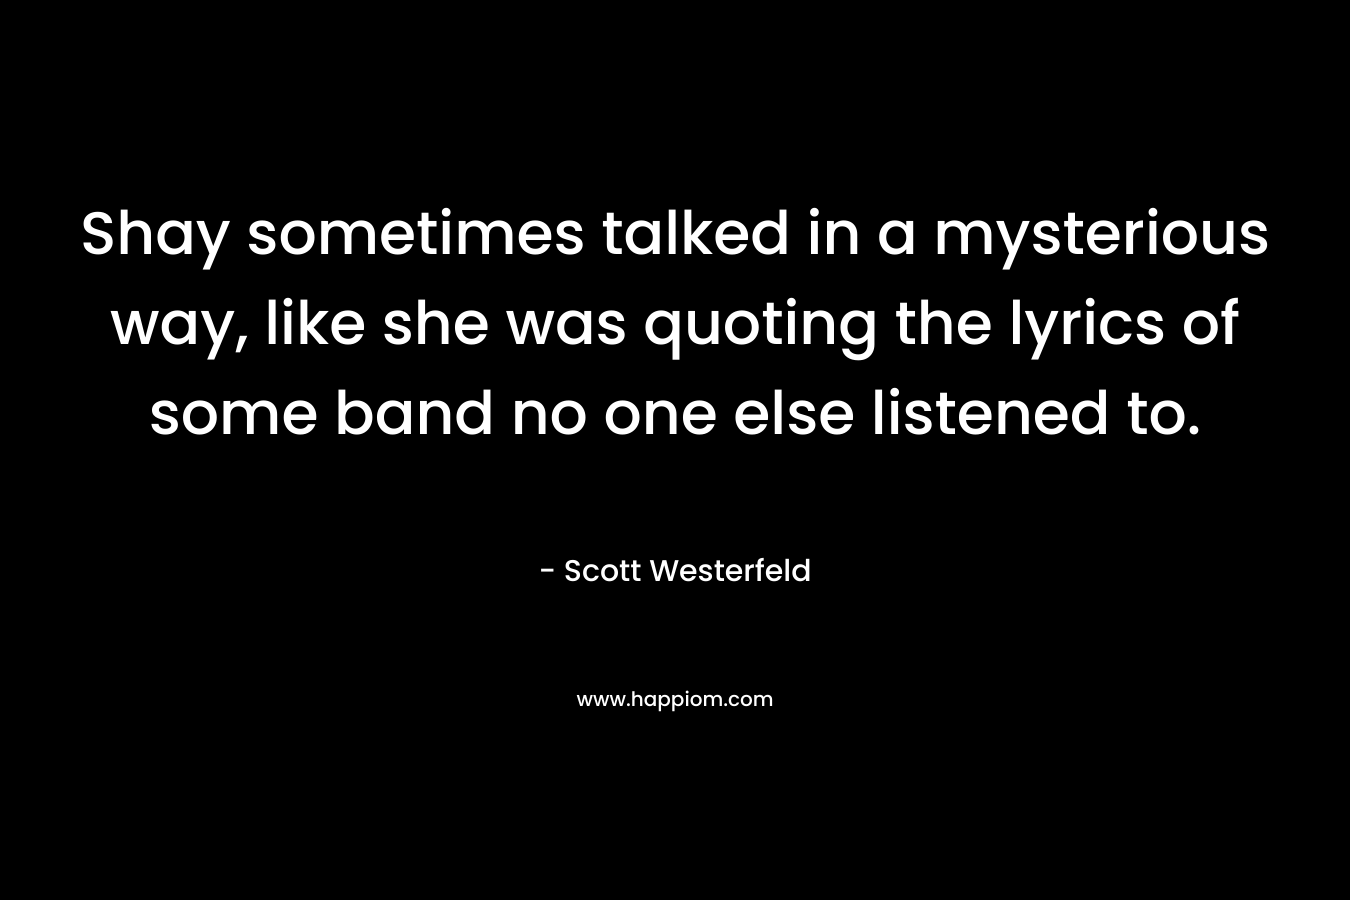 Shay sometimes talked in a mysterious way, like she was quoting the lyrics of some band no one else listened to. – Scott Westerfeld